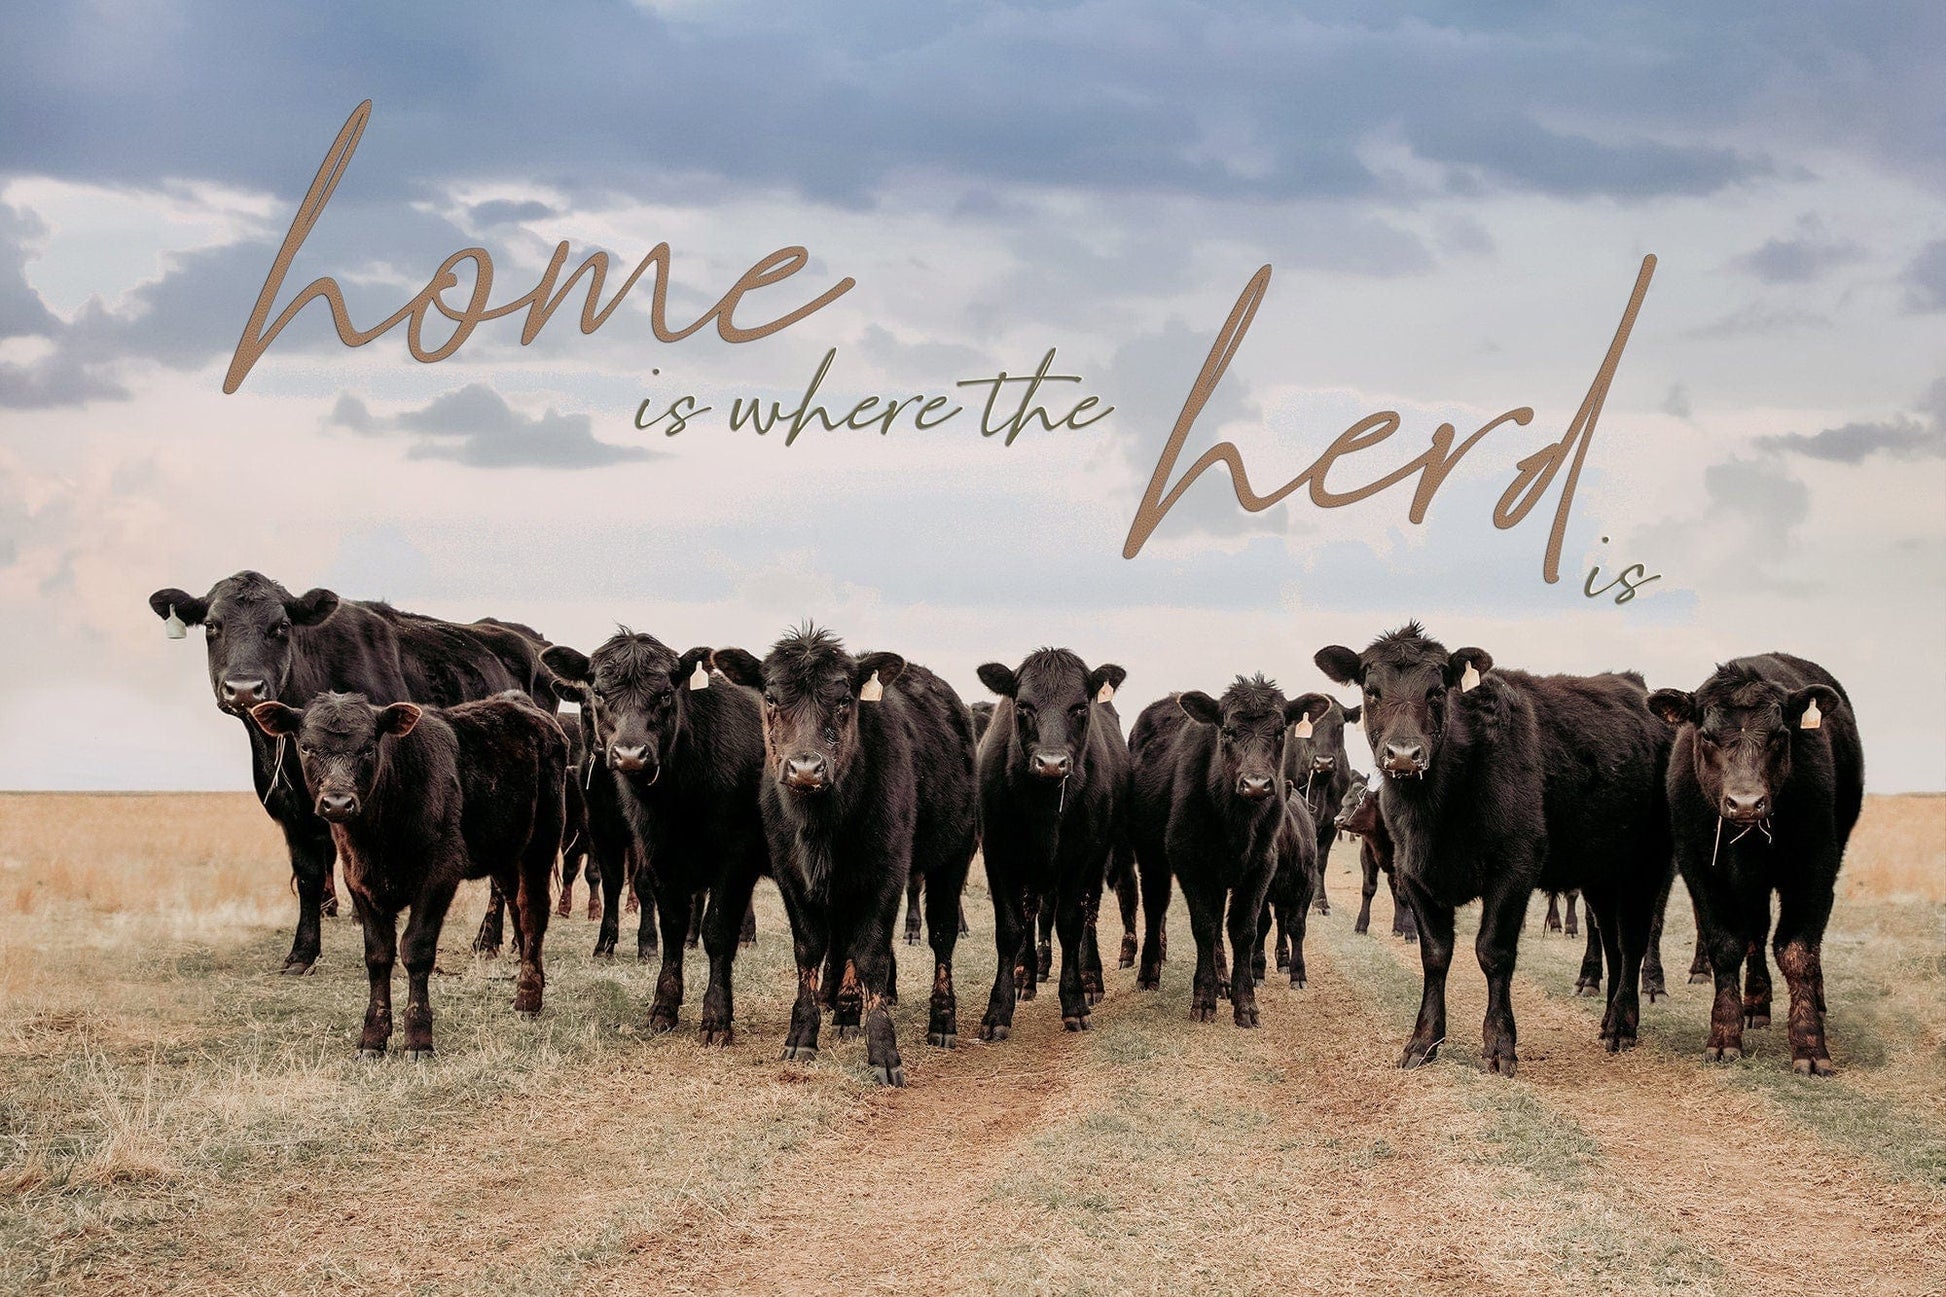 Teri James Photography Wall Art Paper Photo Print / 12 x 18 Inches Home is Where the Herd Is - Black Angus Cattle Inspirational Canvas